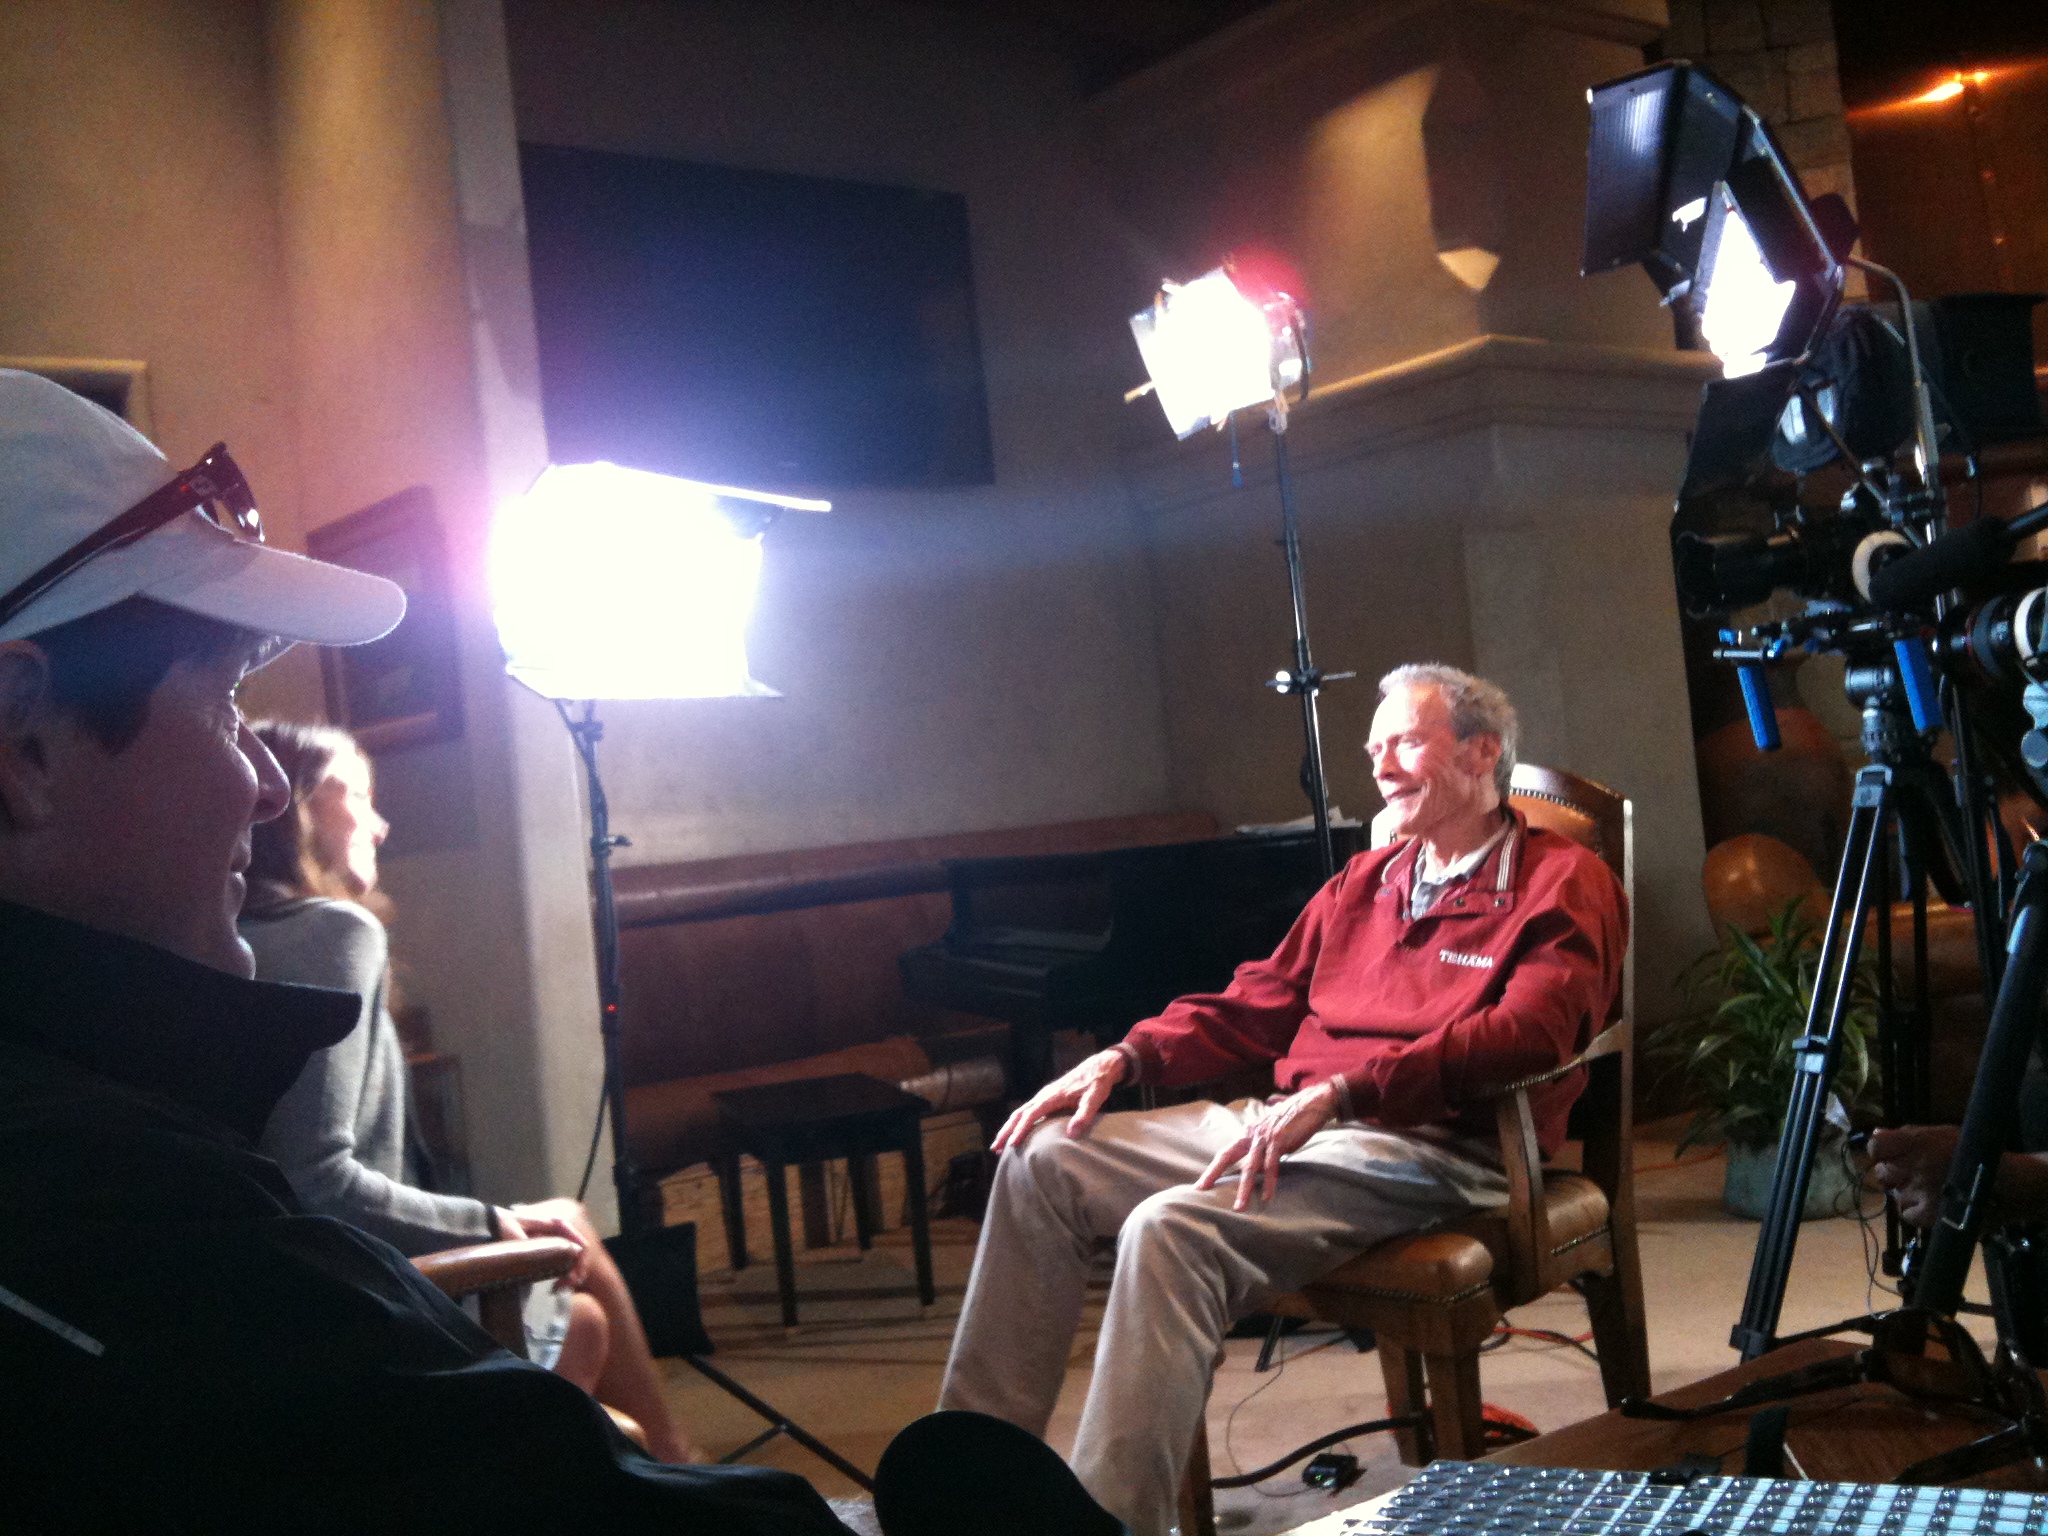 Filming Clint Eastwood for Back9 Network